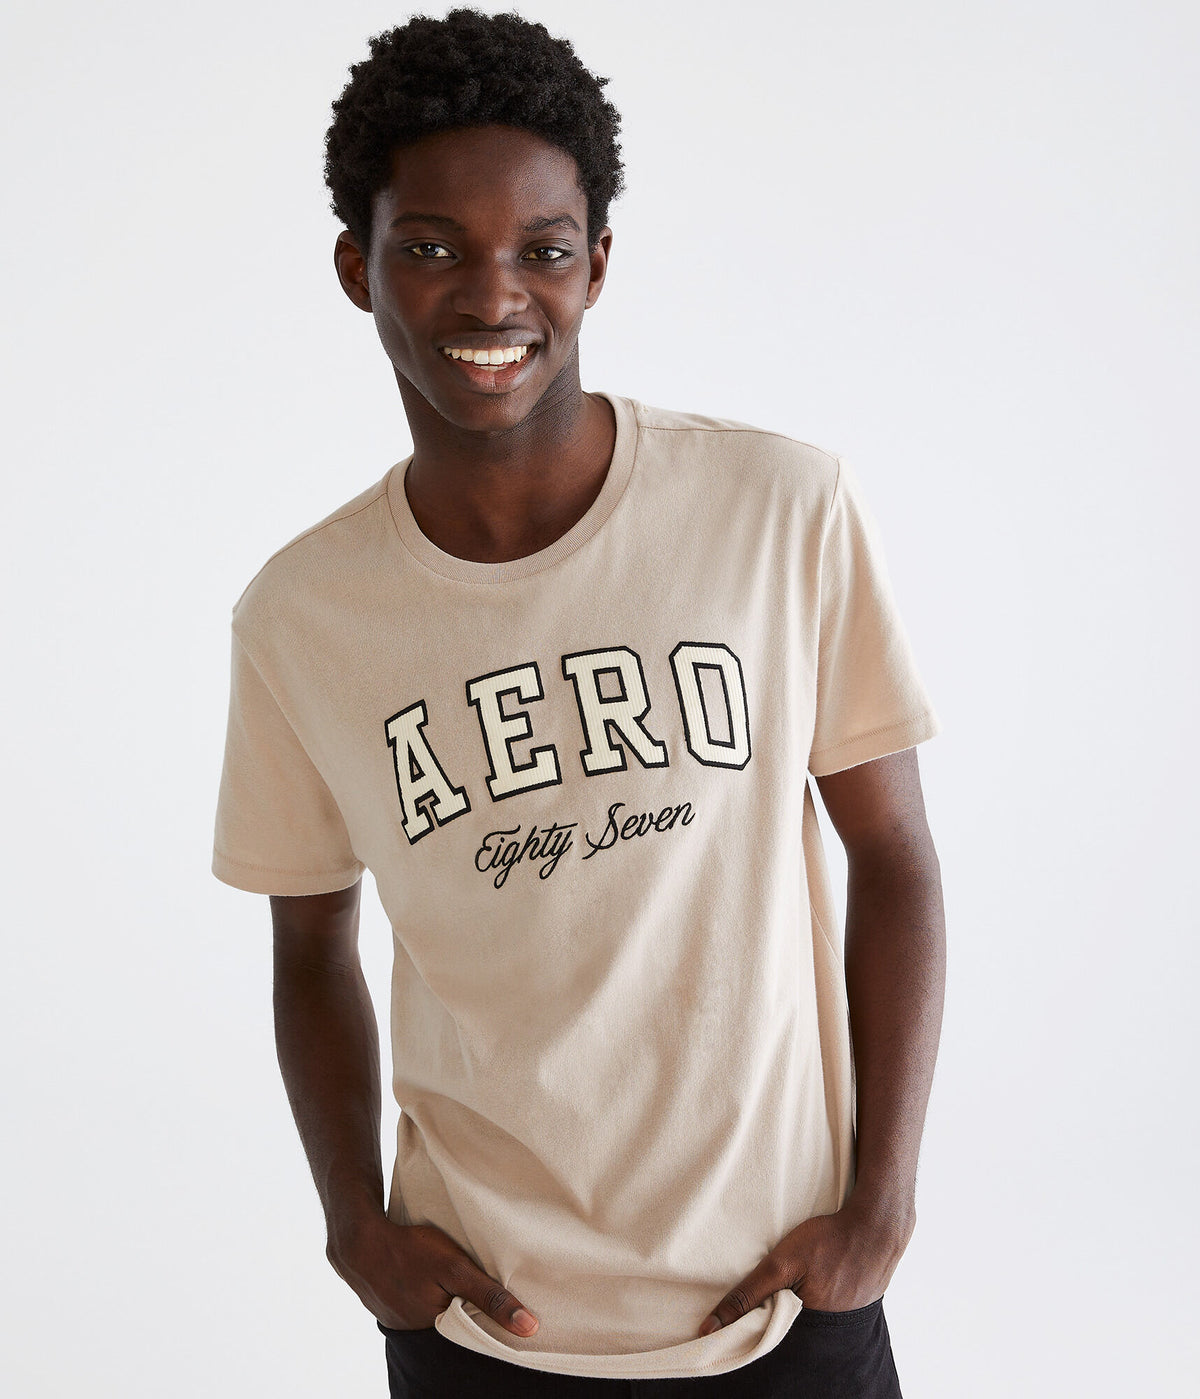 Aeropostale Mens' Eighty Seven Applique Graphic Tee - Beige - Size M - Cotton - Teen Fashion & Clothing Warm Taupe